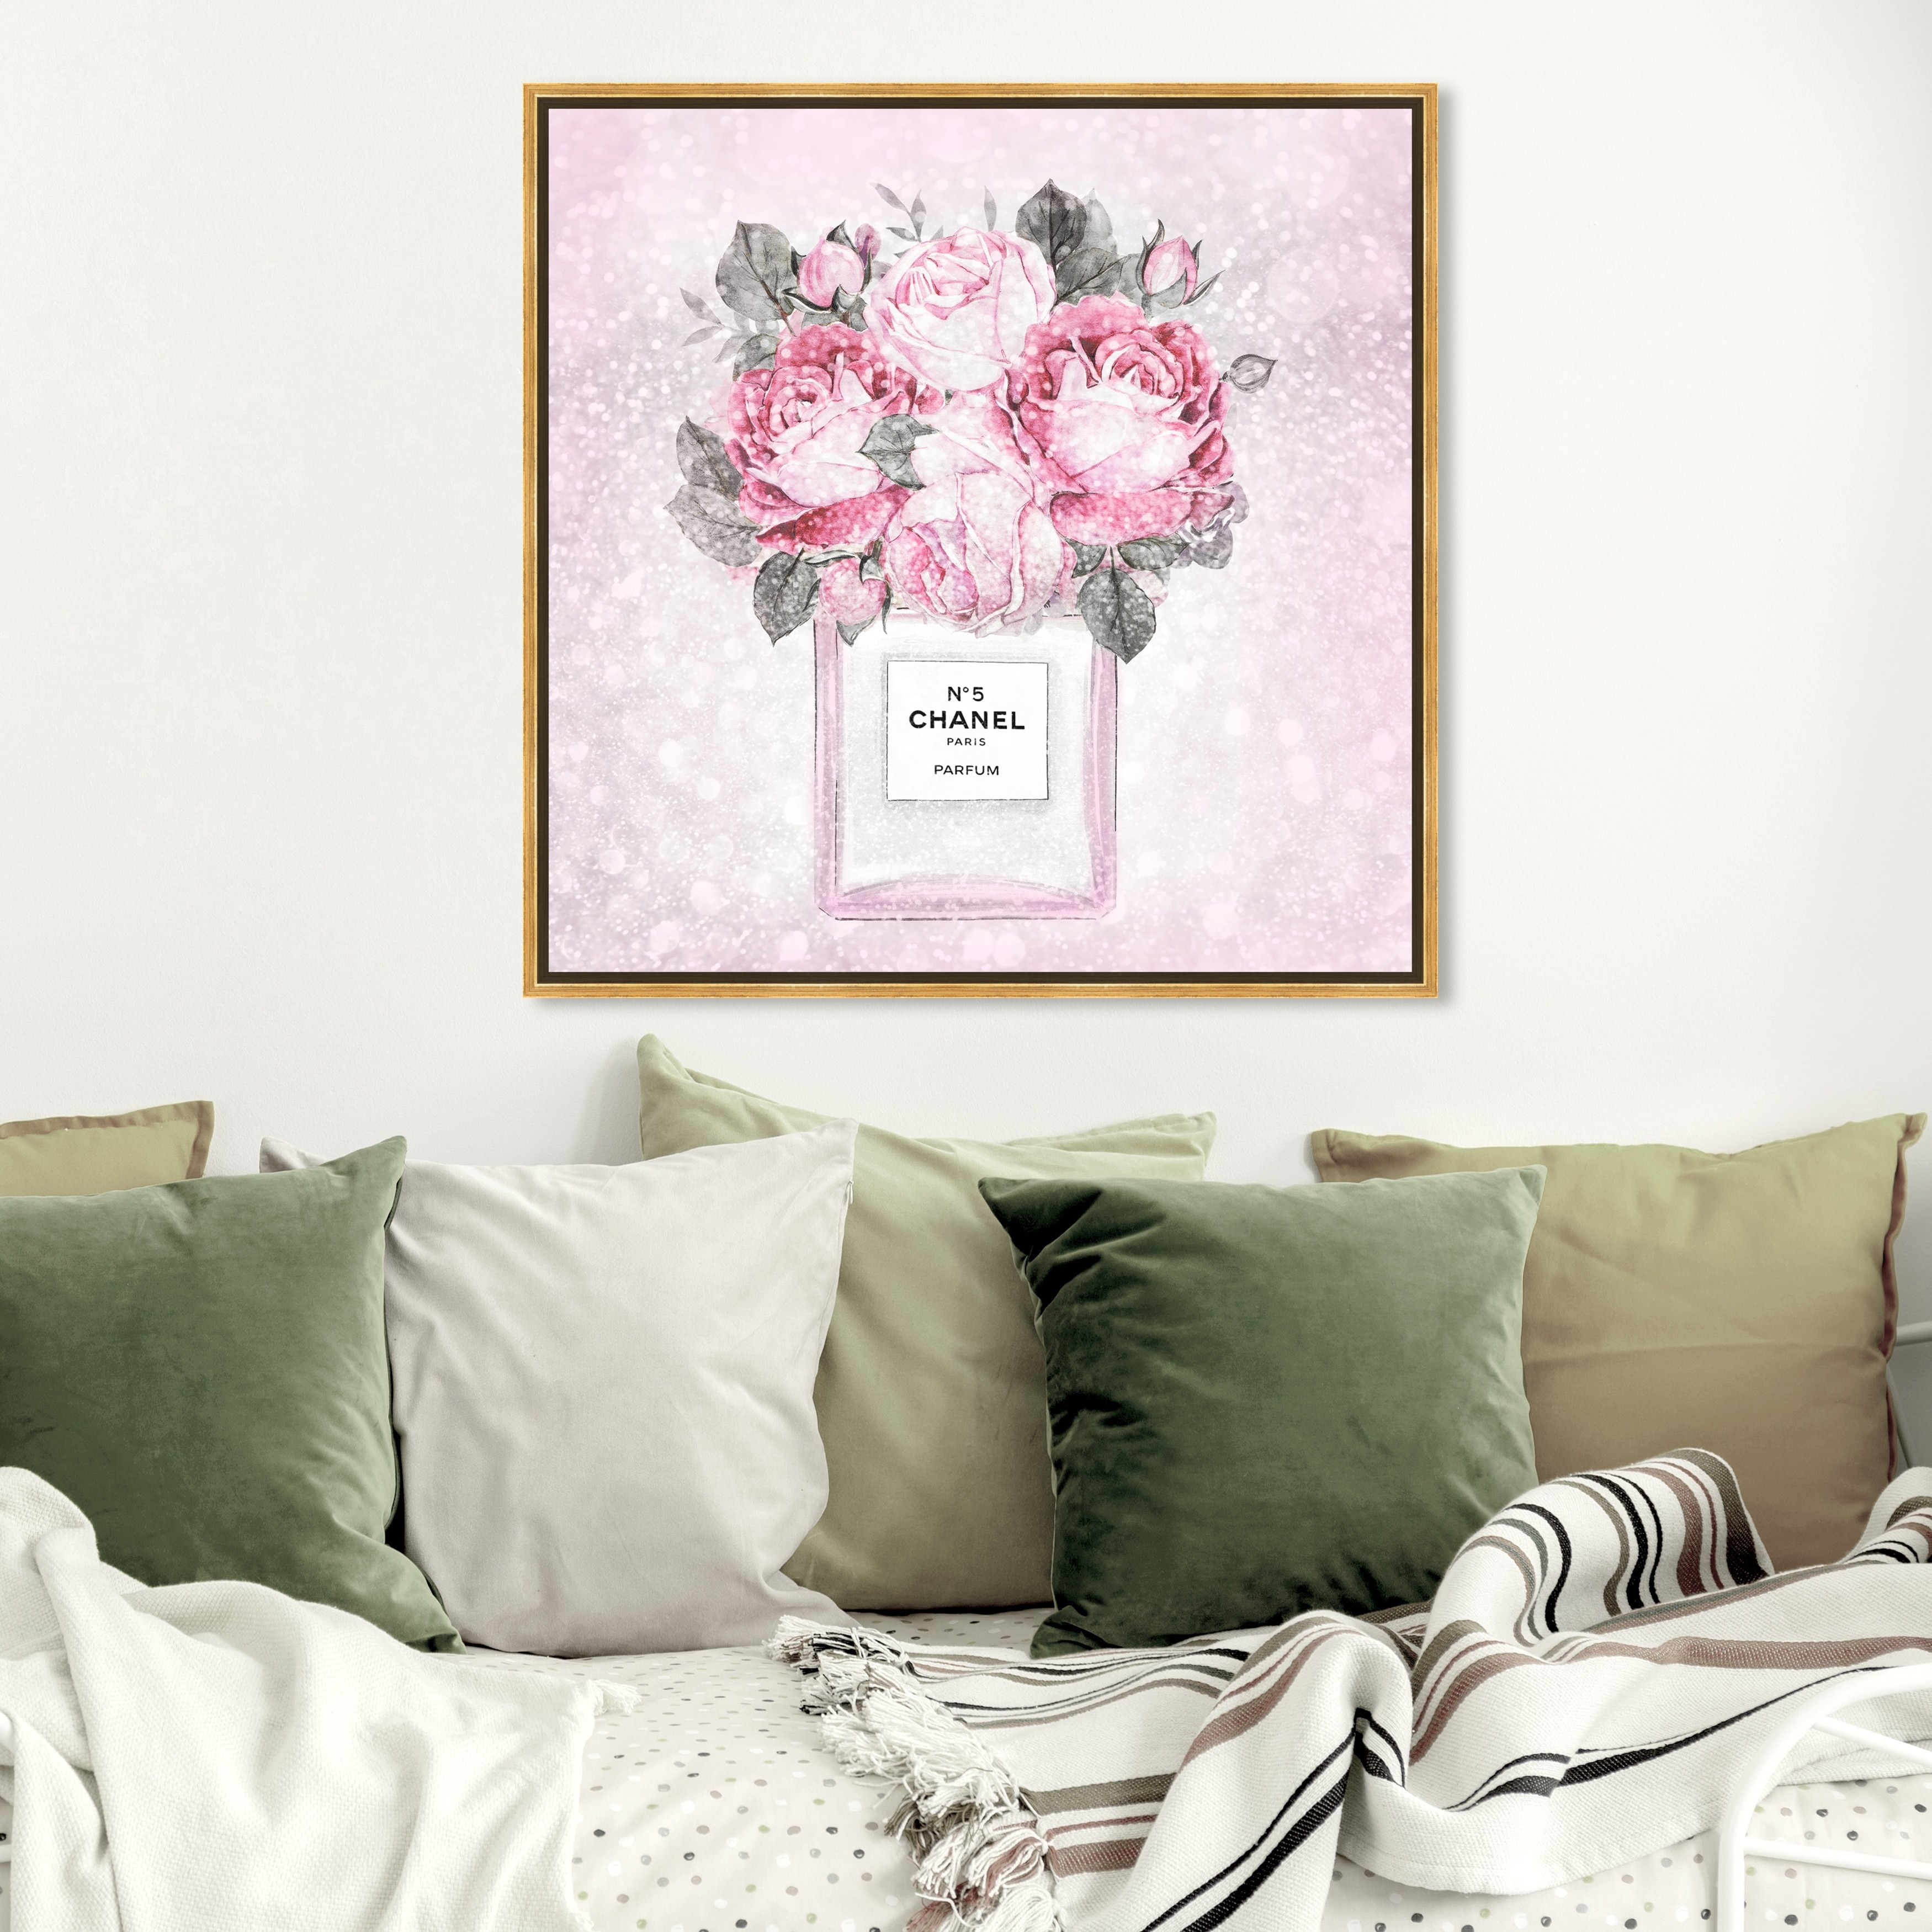 Oliver Gal 'Doll Memories - Paris Rose Queen' Fashion and Glam Wall Art Framed Canvas Print Perfumes - Pink, White